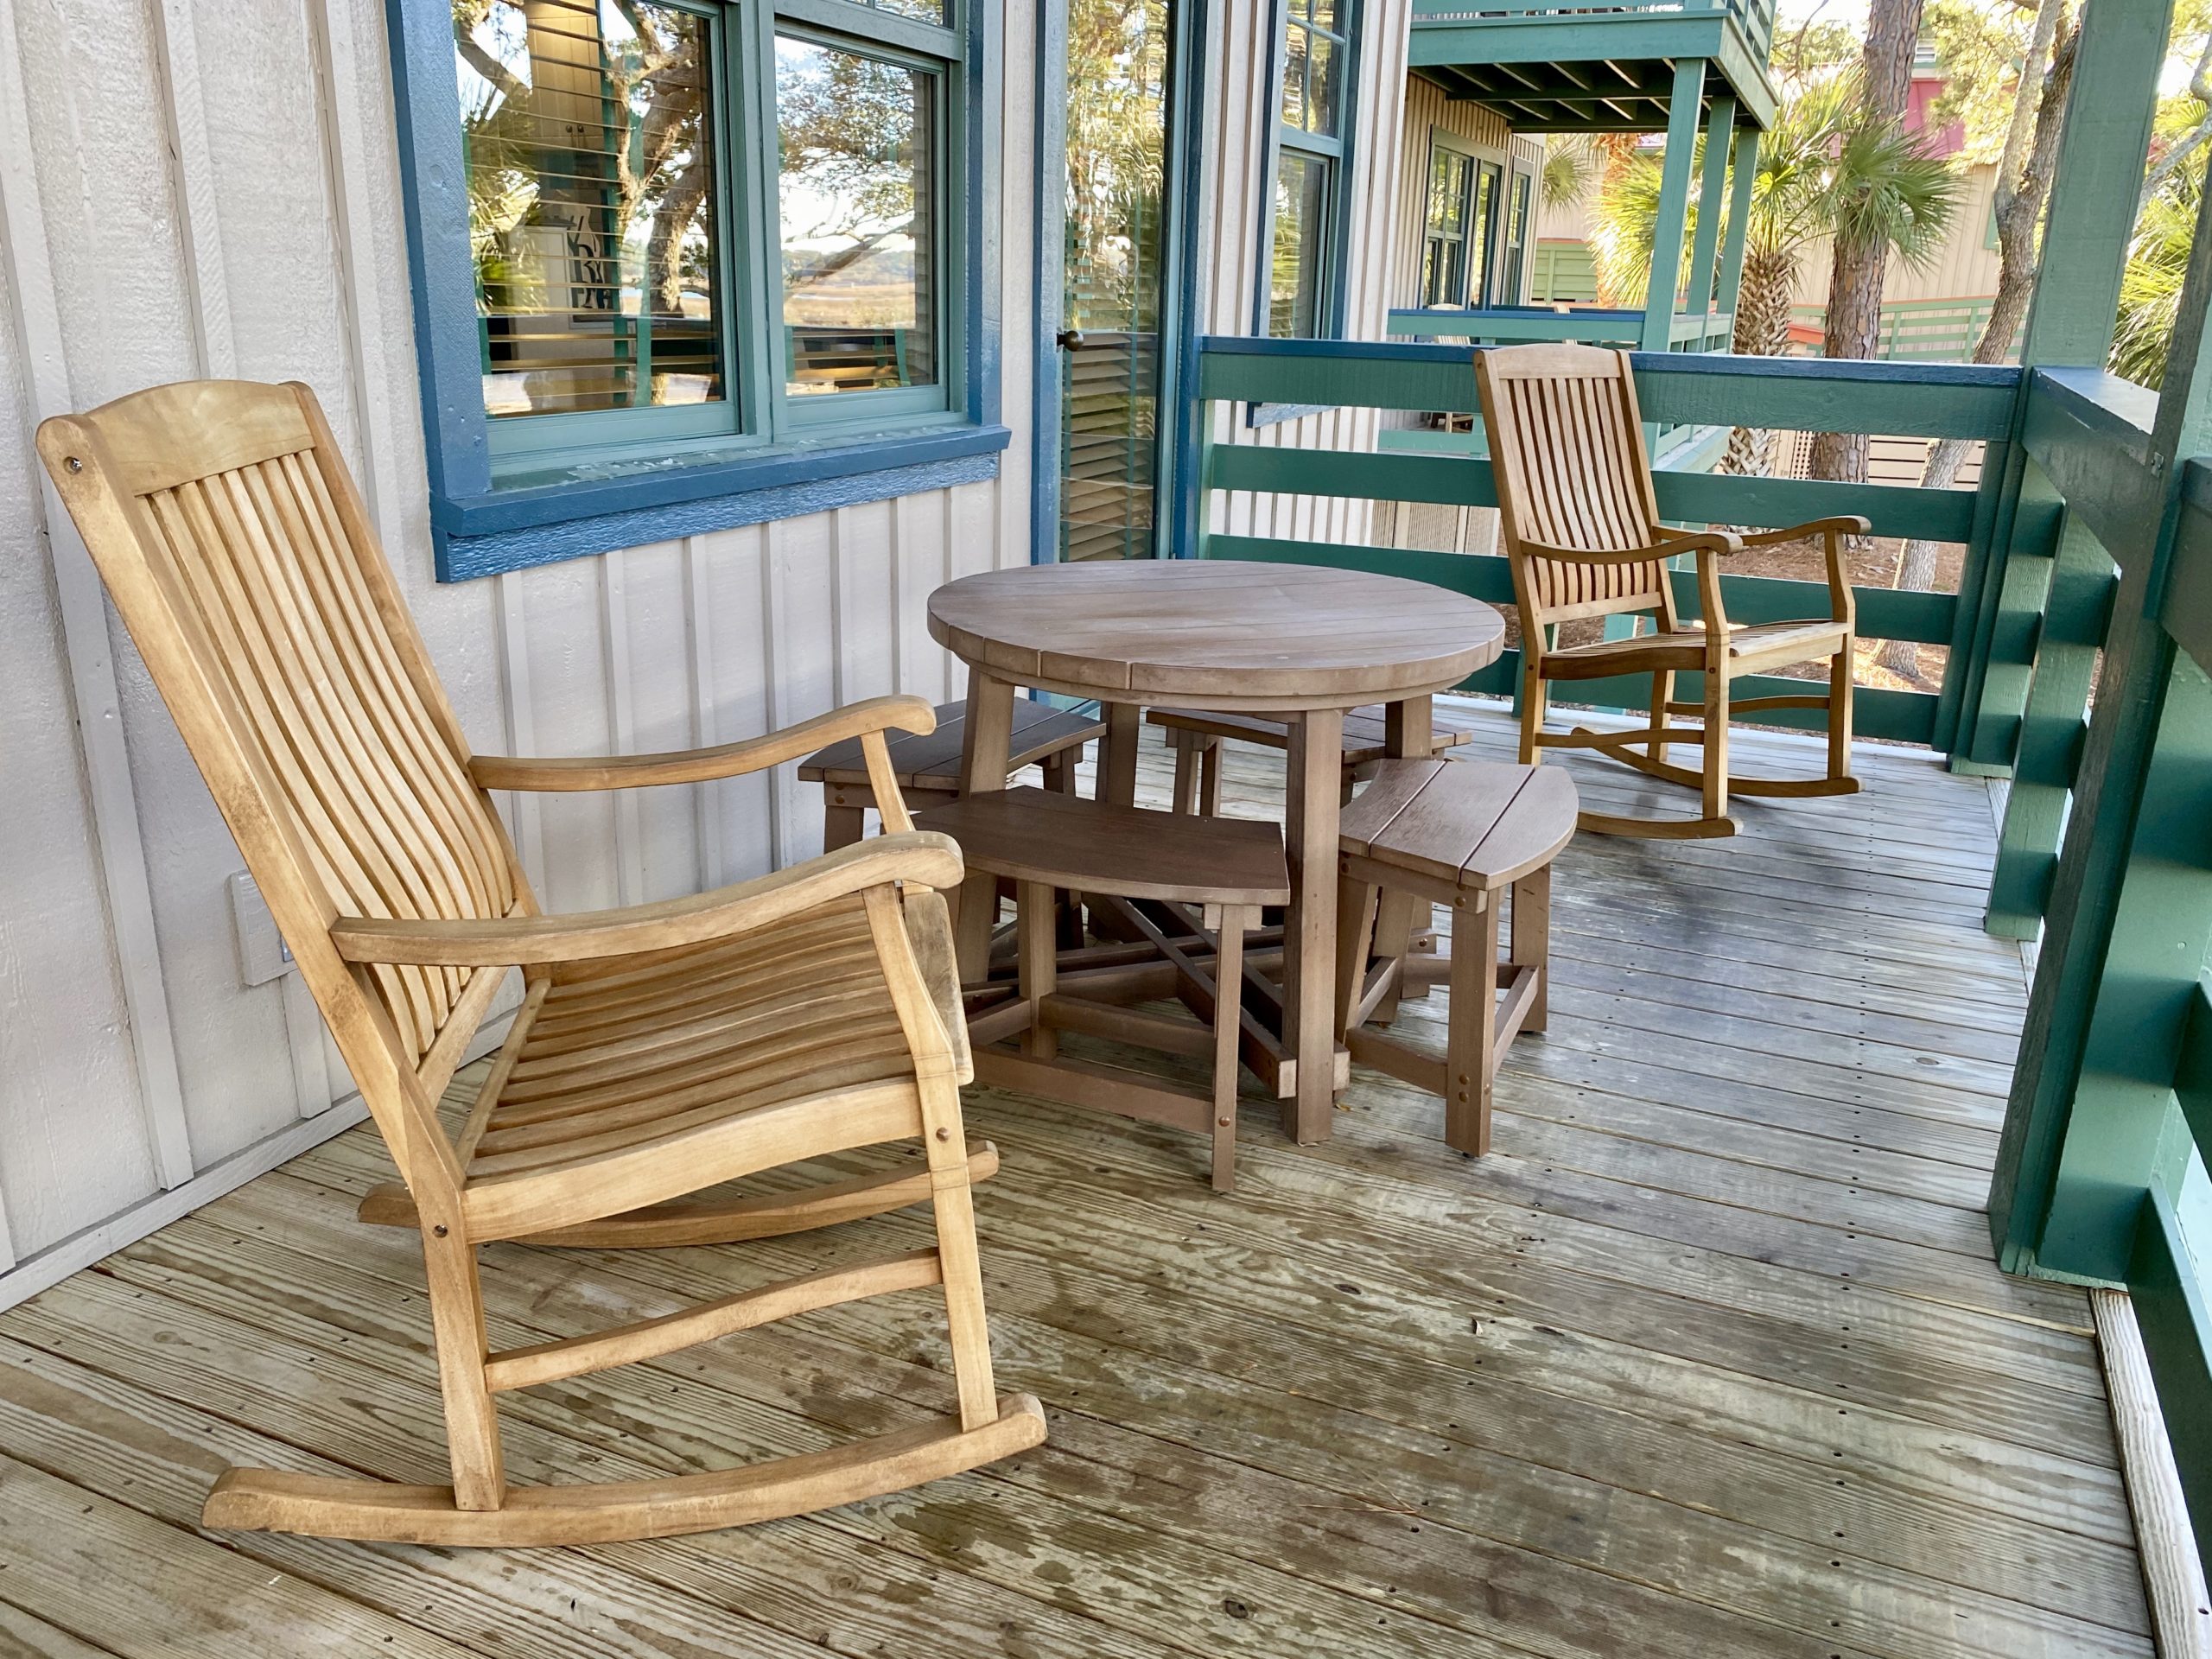 a wooden chairs and a table on a porch